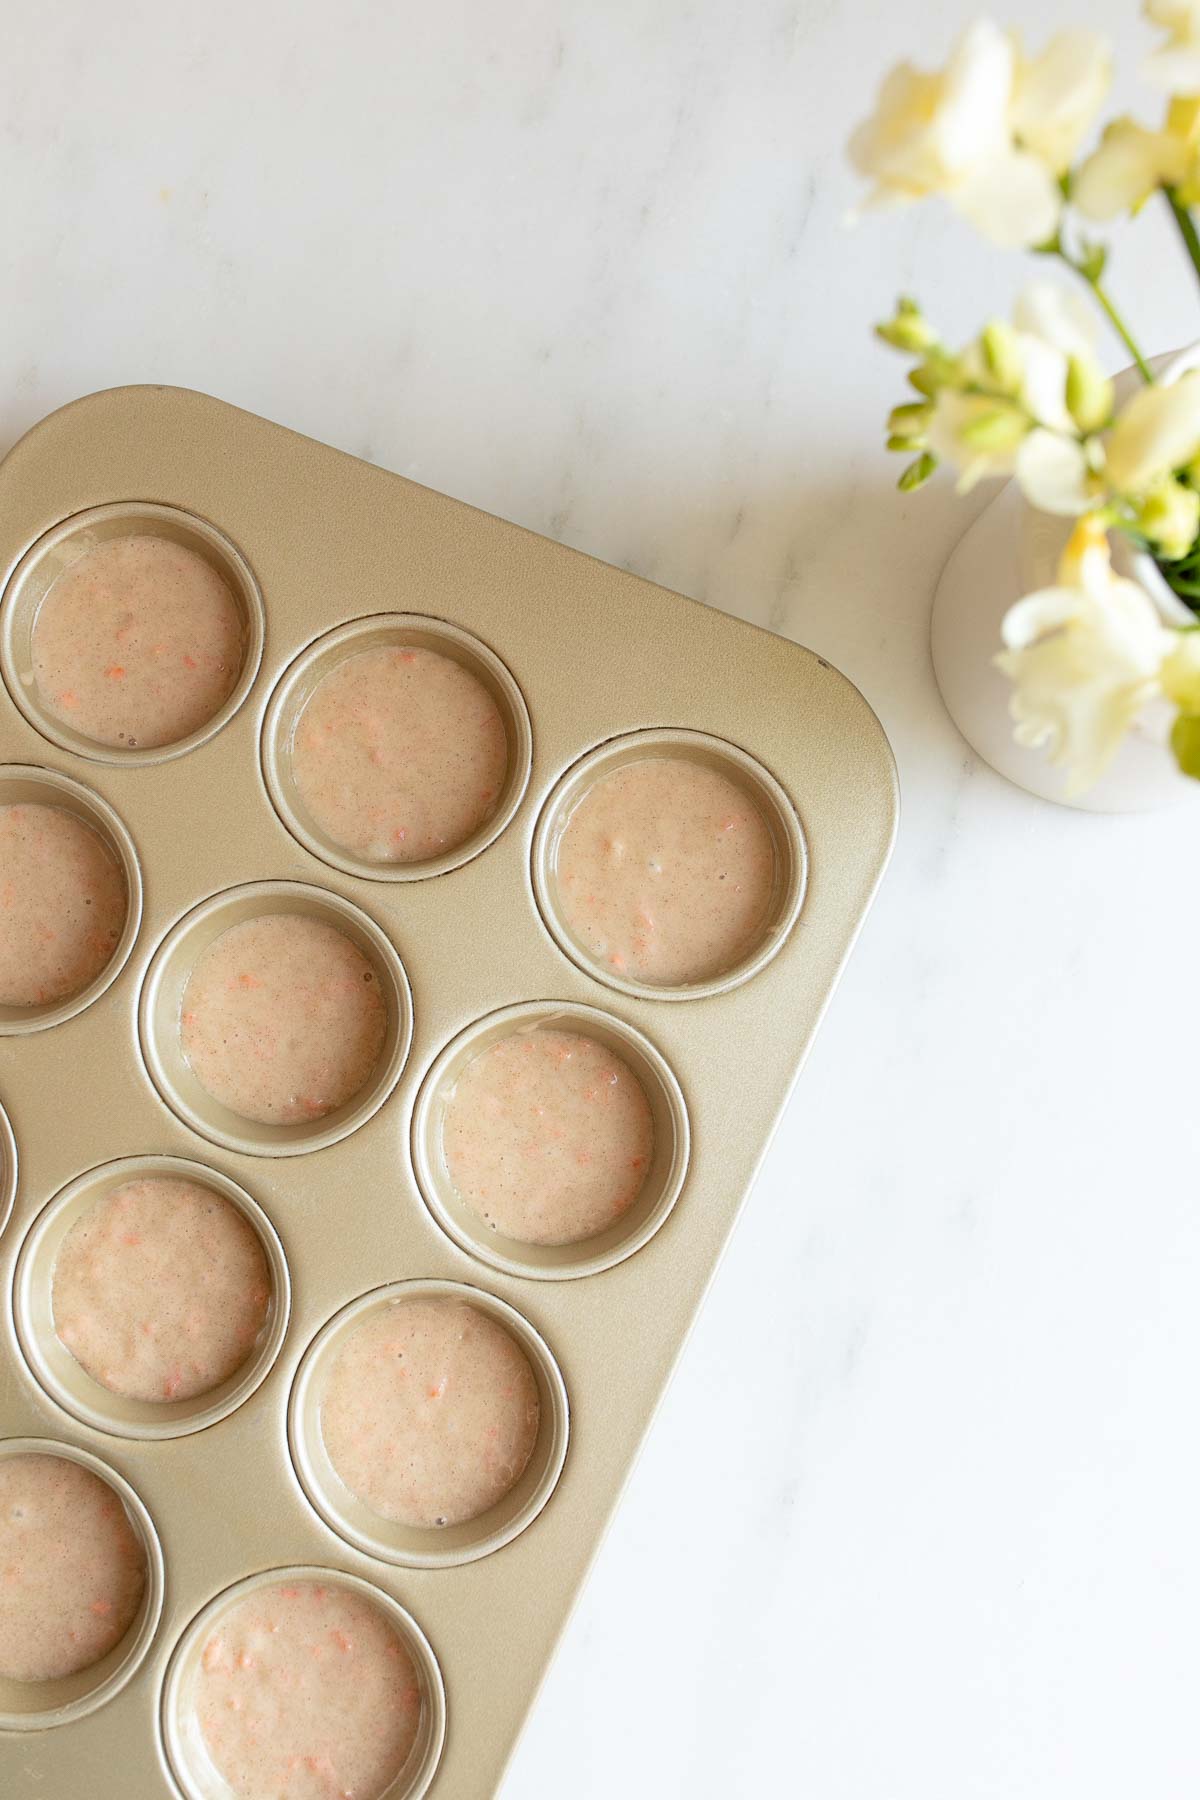 A muffin tin with Carrot Cake Muffins in it.